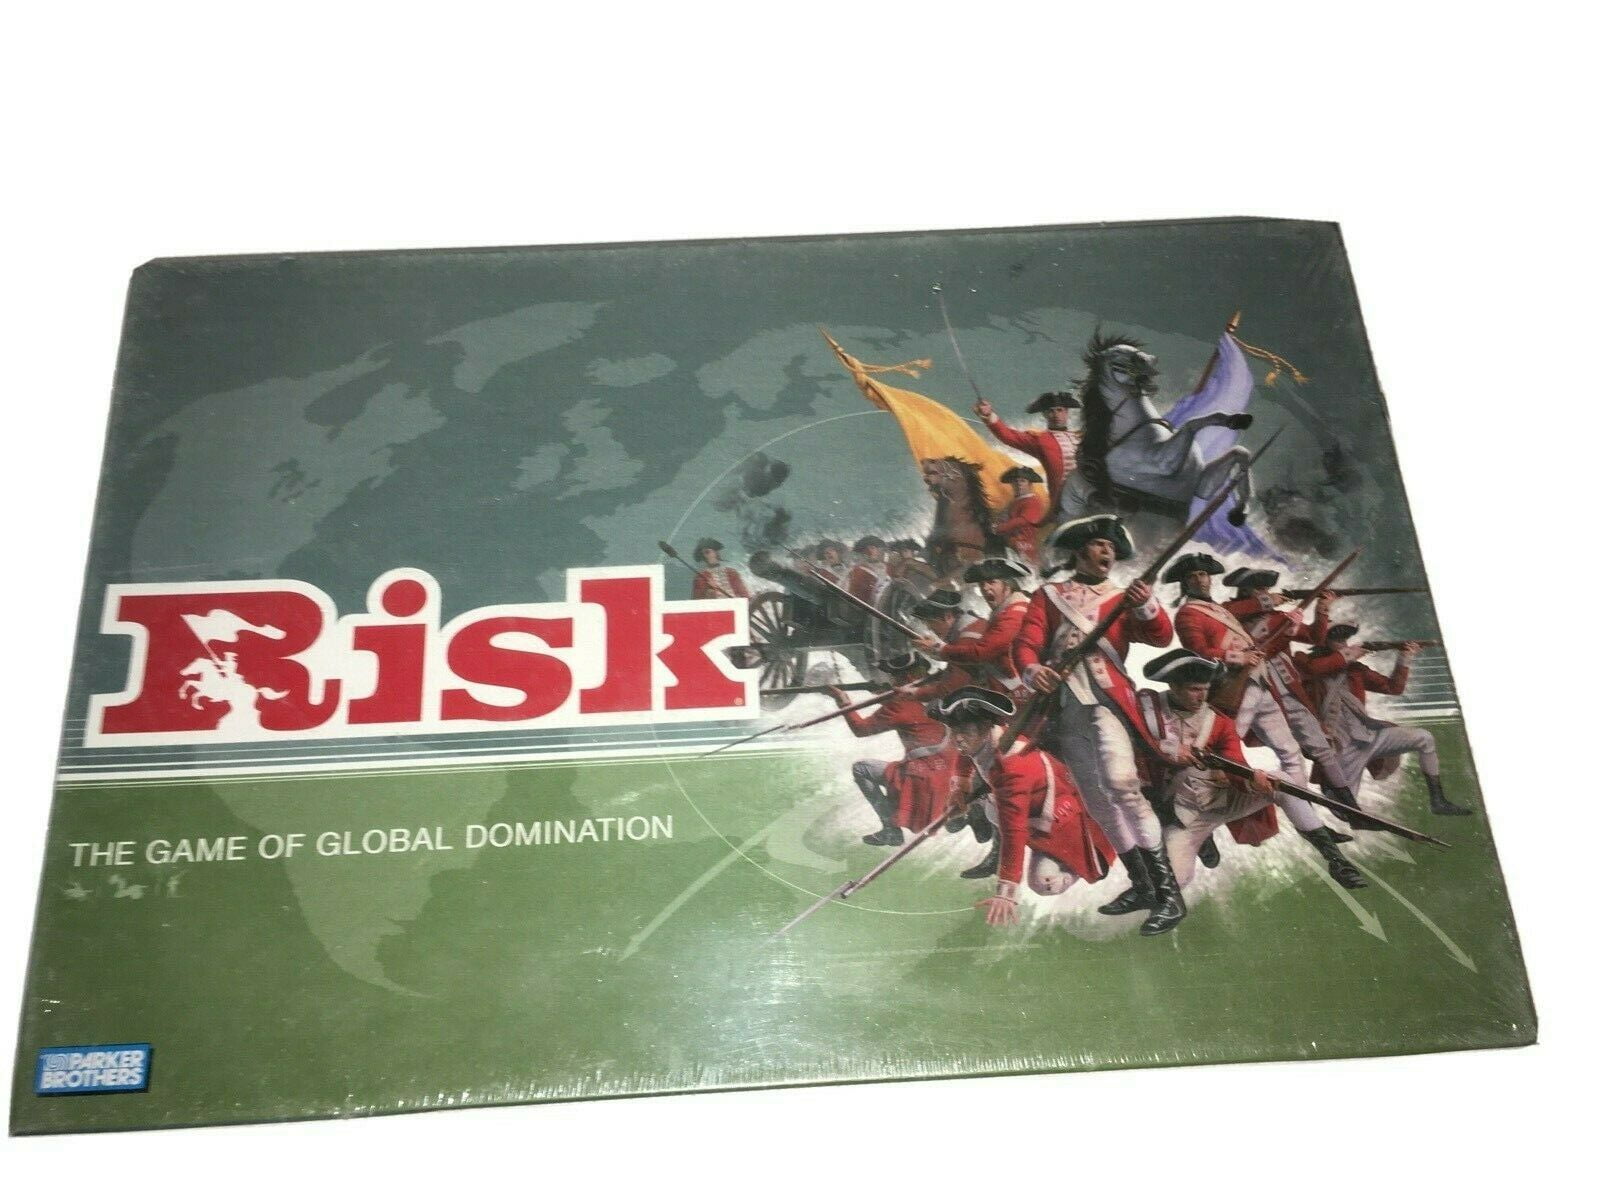 2003 Risk The Game of Global Domination Parker Brothers Complete for sale online 